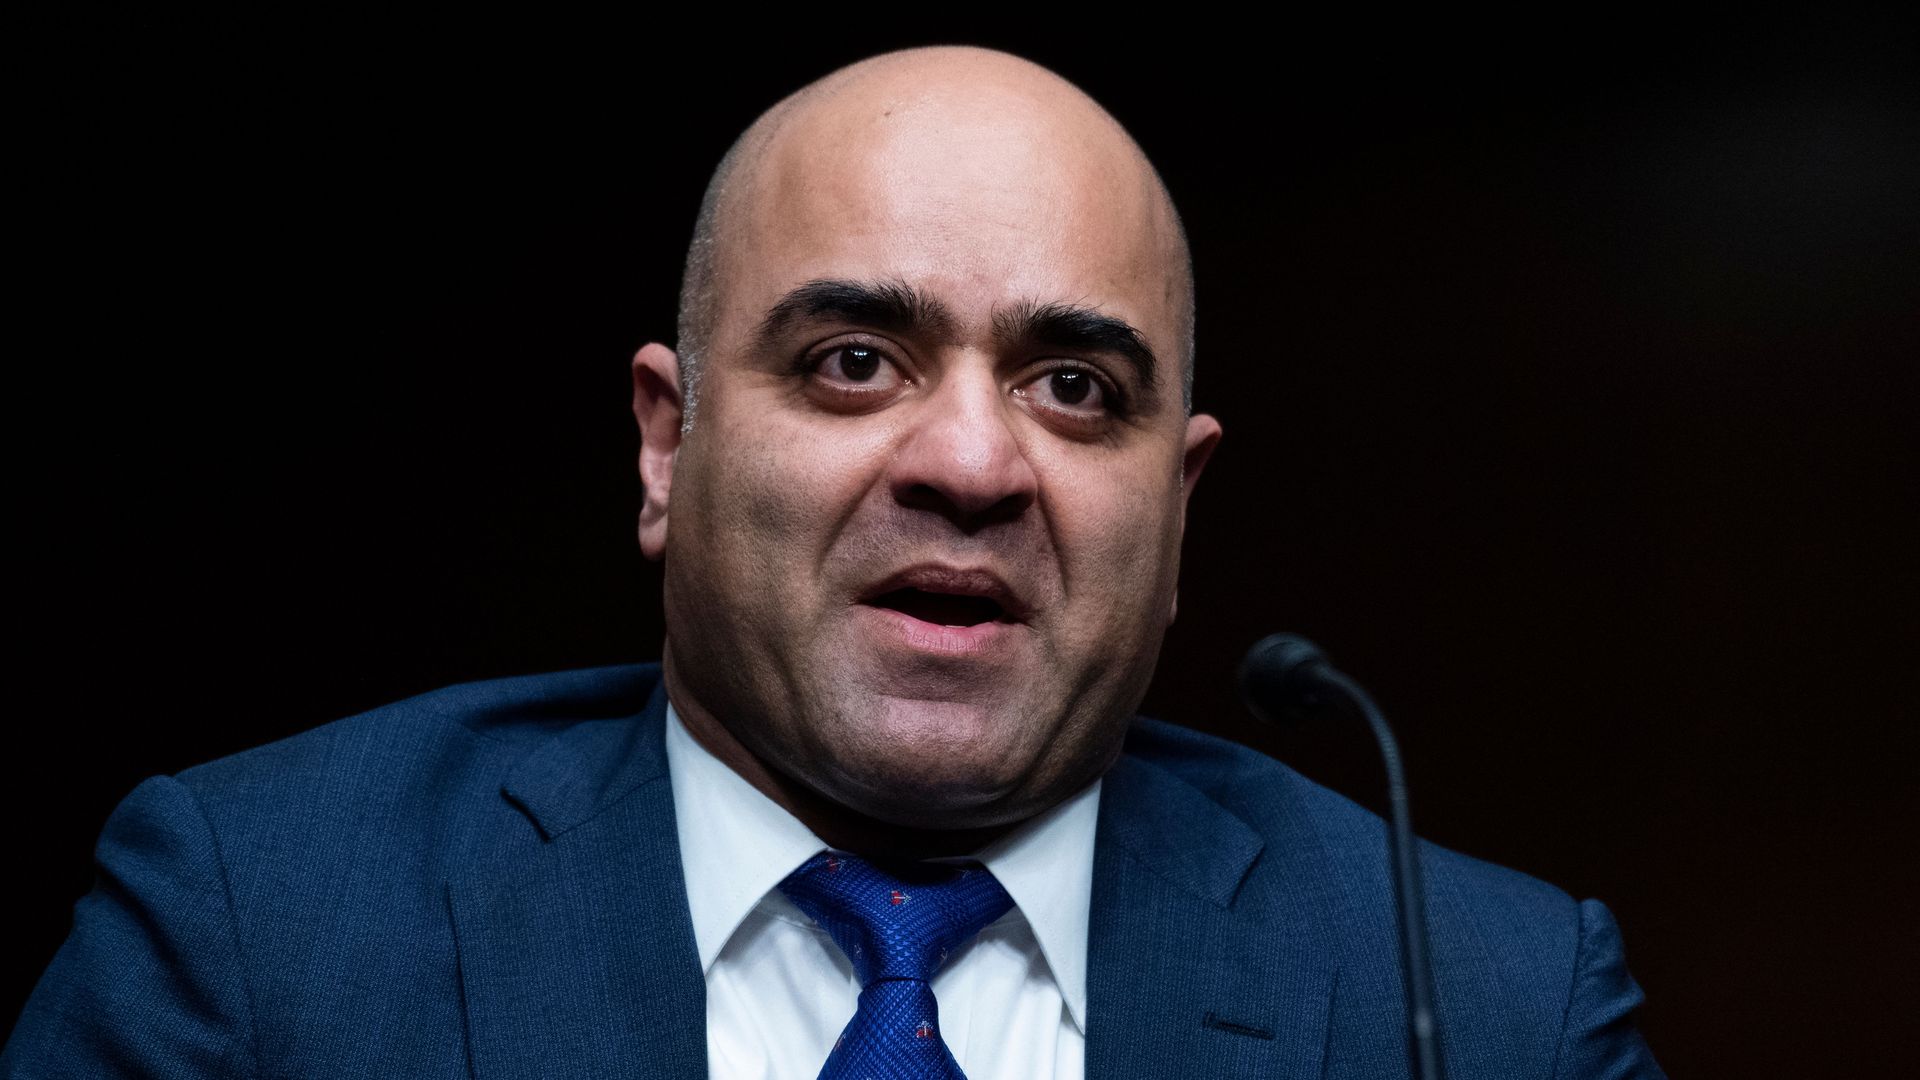 Zahid Quraishi, nominee for U.S. District Judge for the District of New Jersey, testifying during a Senate Judiciary Committee hearing in April 2021.